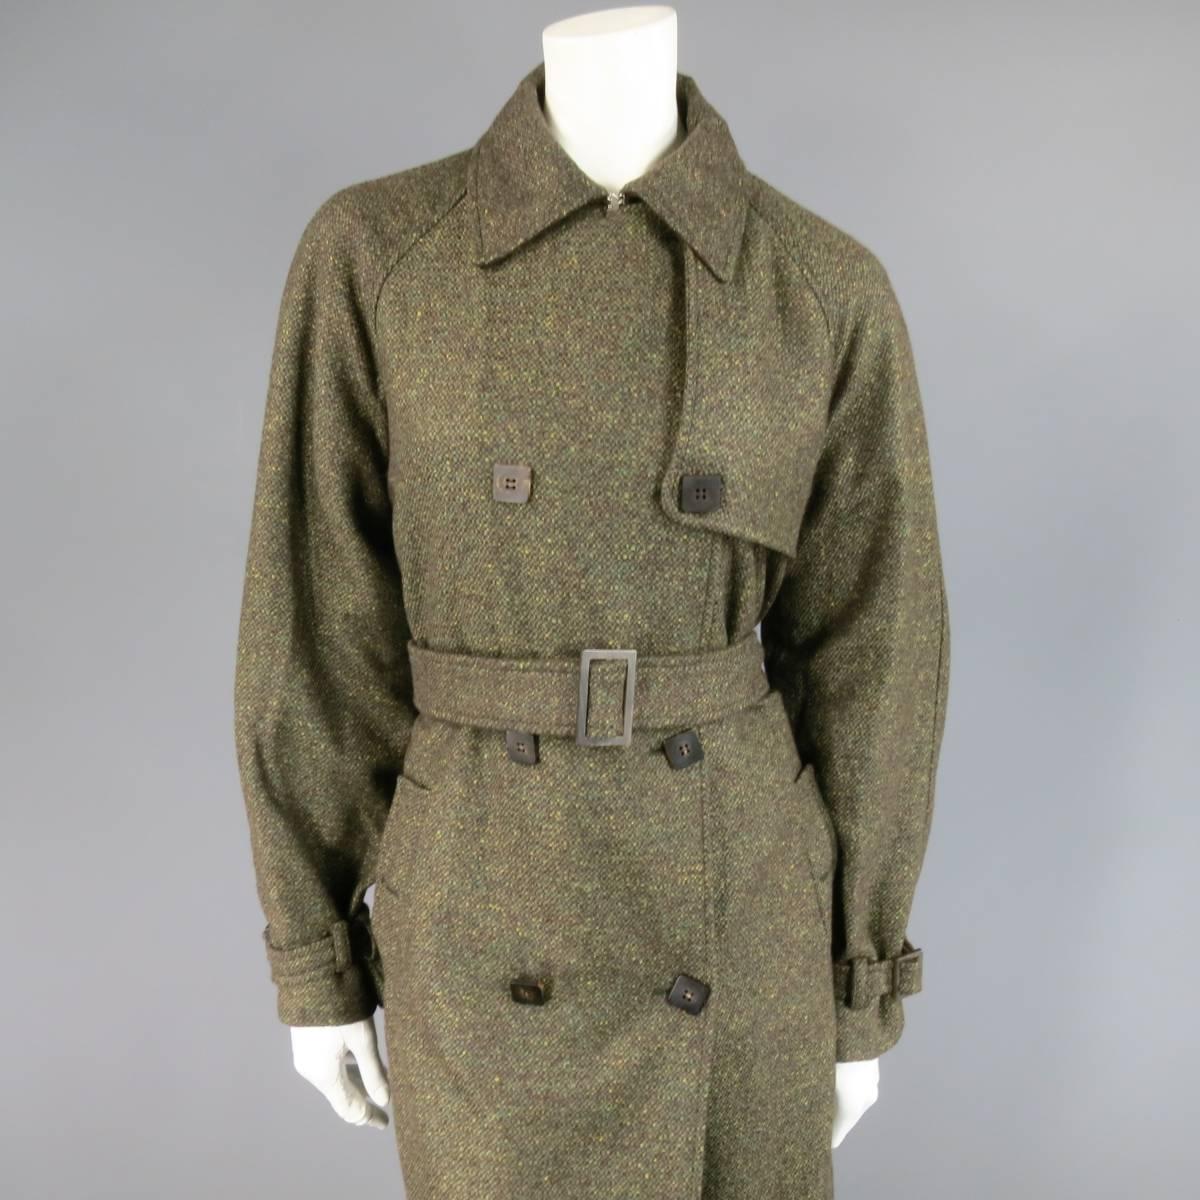 This gorgeous LORO PIANA winter trench coat comes in a brown and olive green Eart tone tweed and features a classic collar lapel, raglan sleeves with belts, double breasted button up closure, storm flap, double button slit pockets, belted waist, and